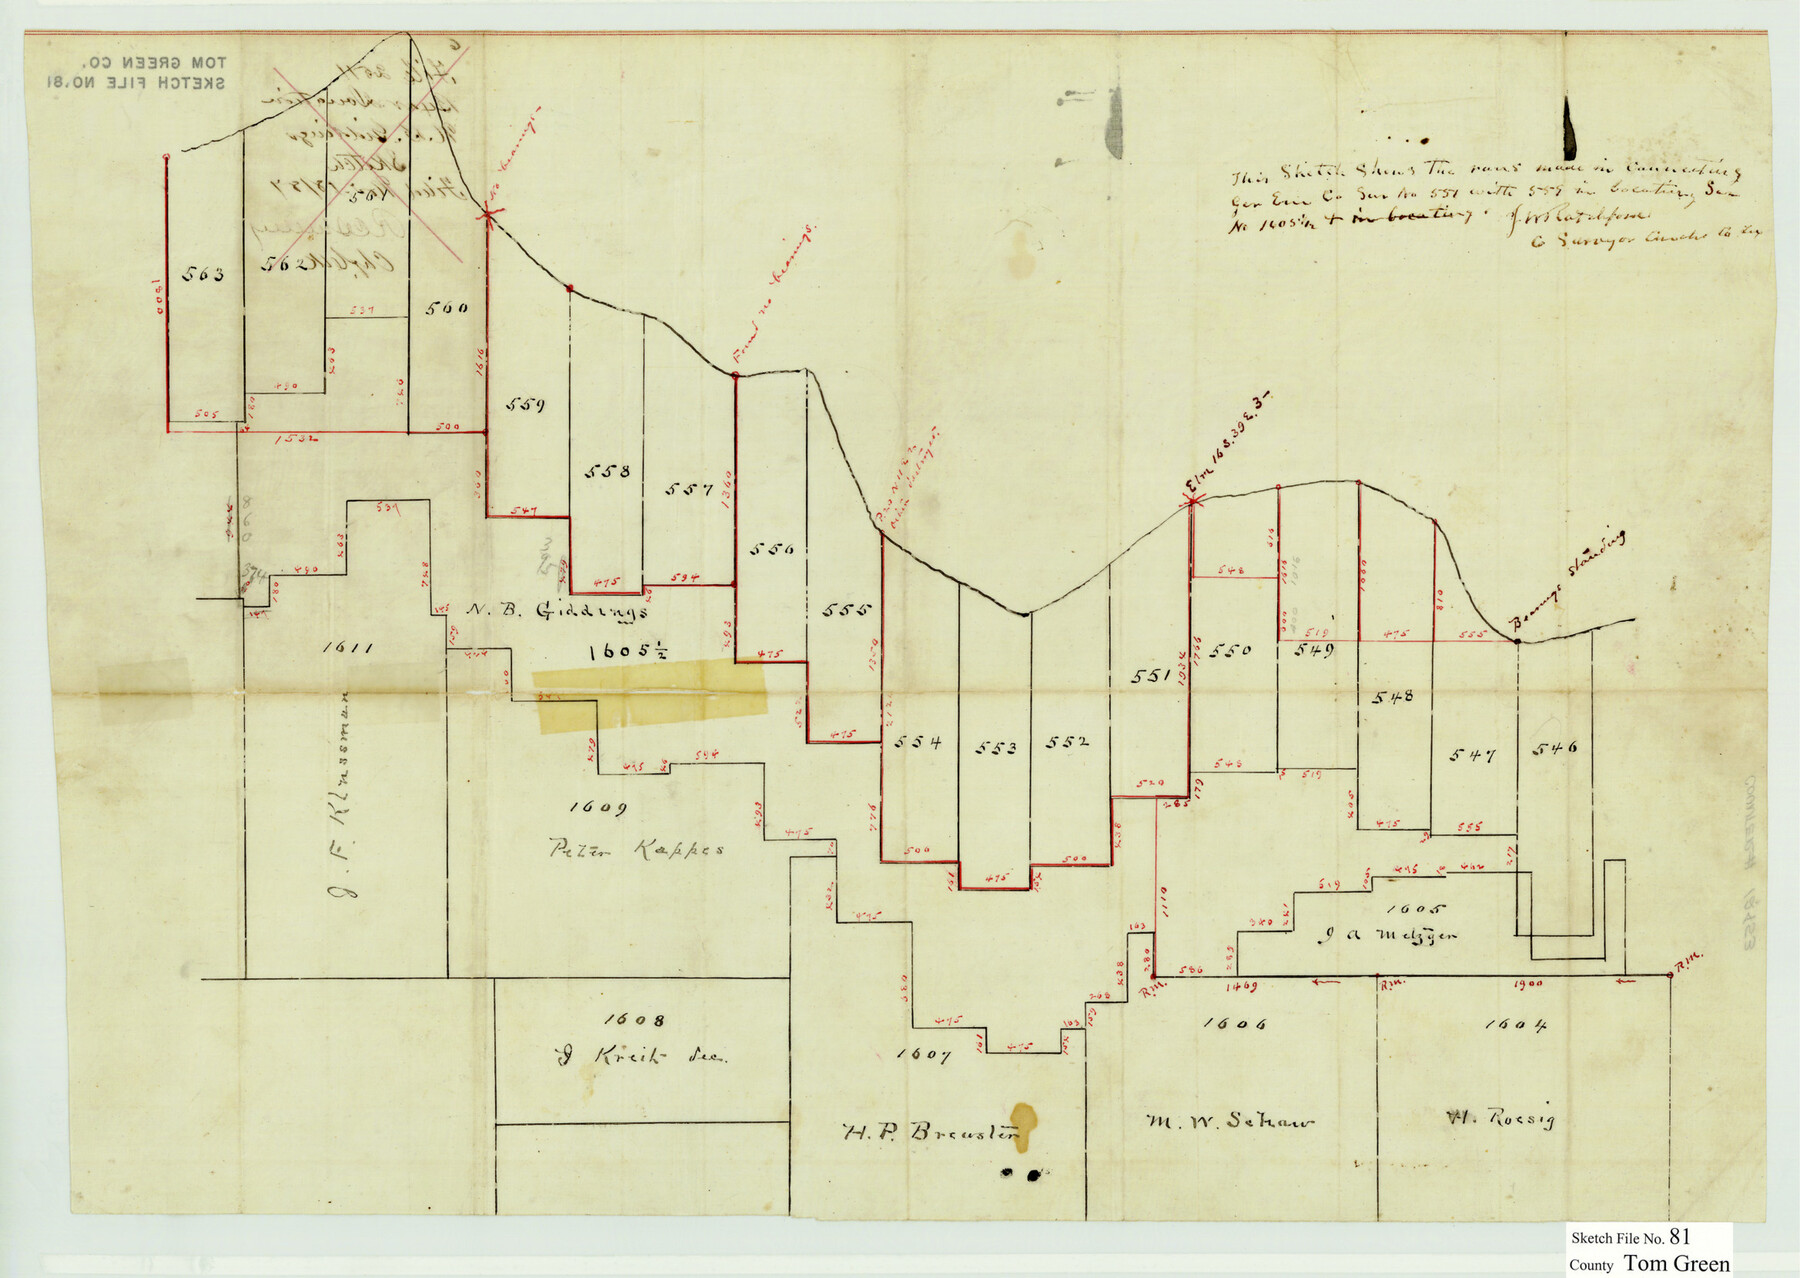 12453, Tom Green County Sketch File 81, General Map Collection